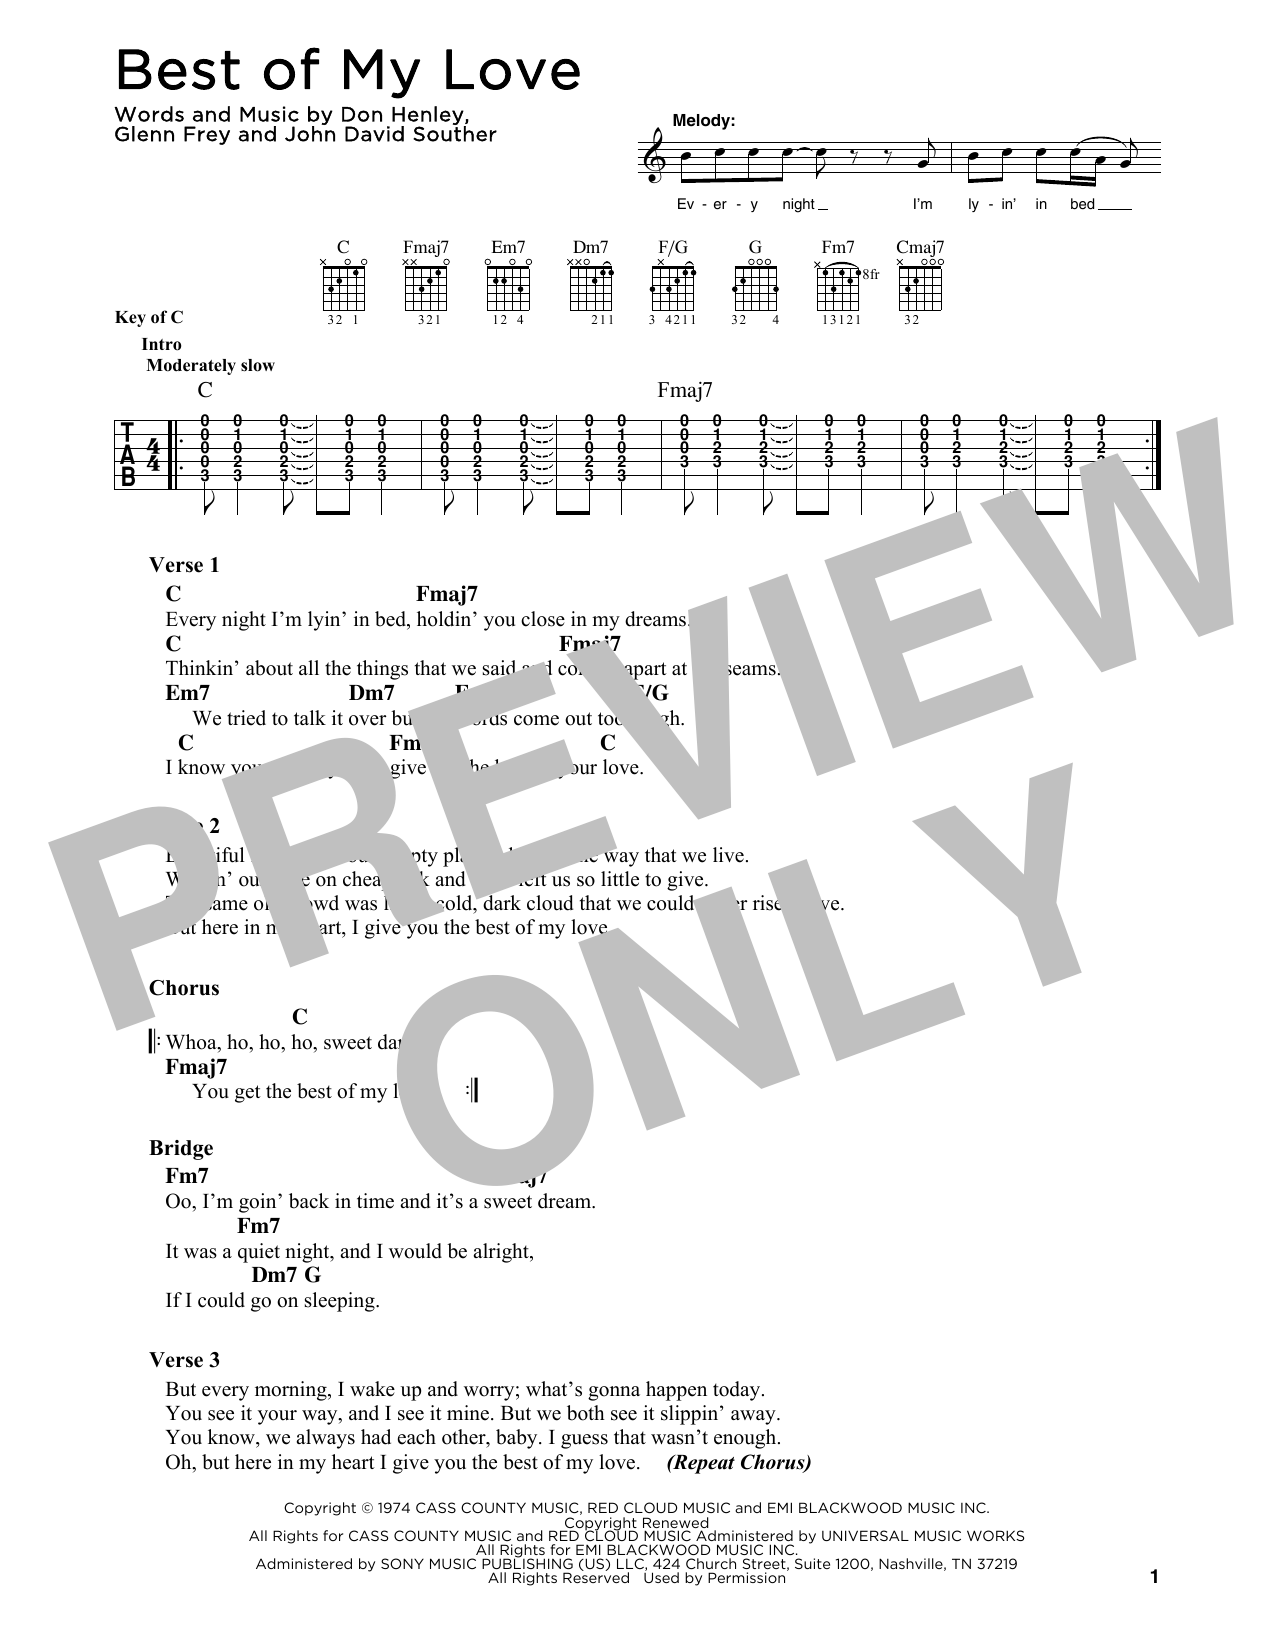 Eagles Best Of My Love sheet music notes printable PDF score